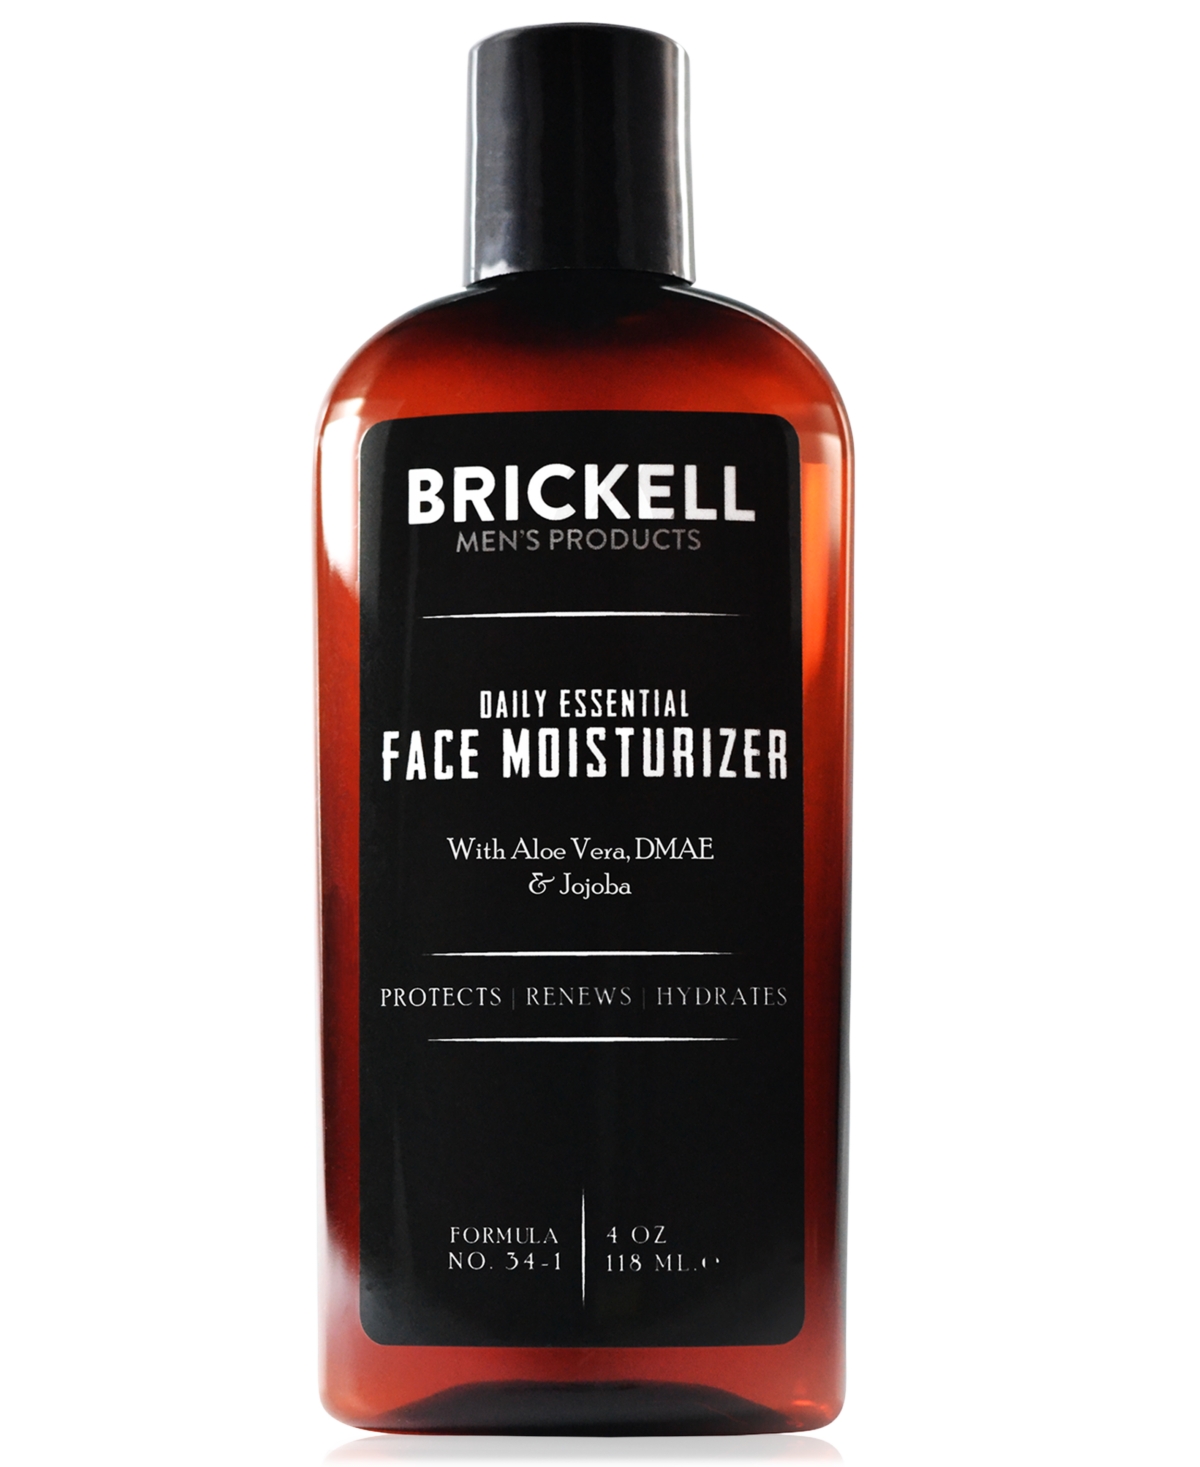 Brickell Mens Products Brickell Men's Products Daily Essential Face Moisturizer, 4 Oz.